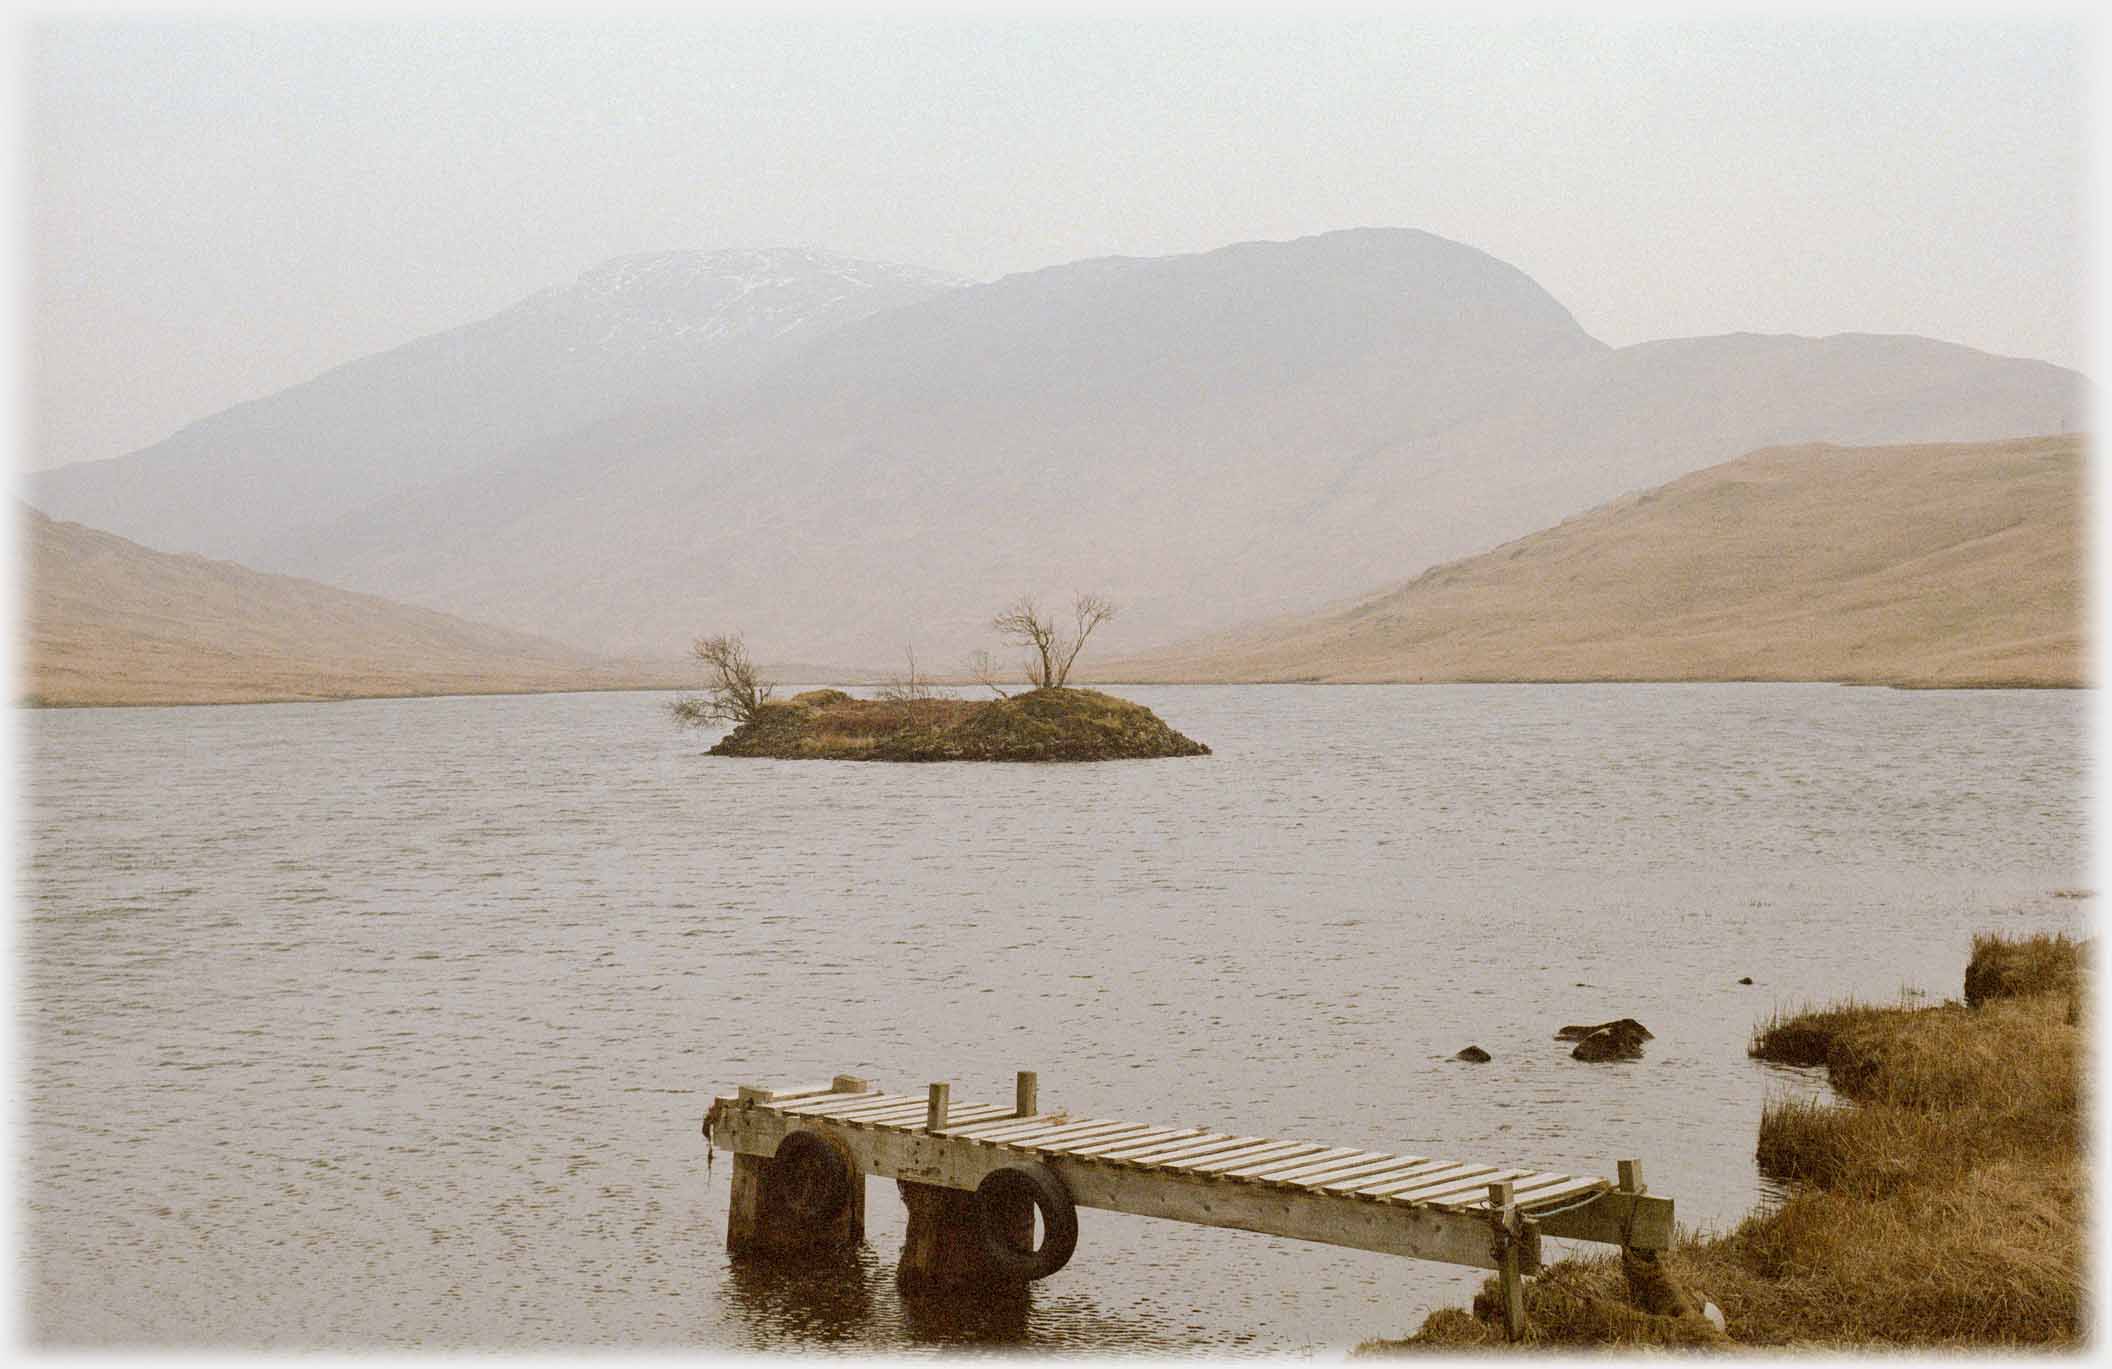 Jetty by loch with small islet and hills beyond.